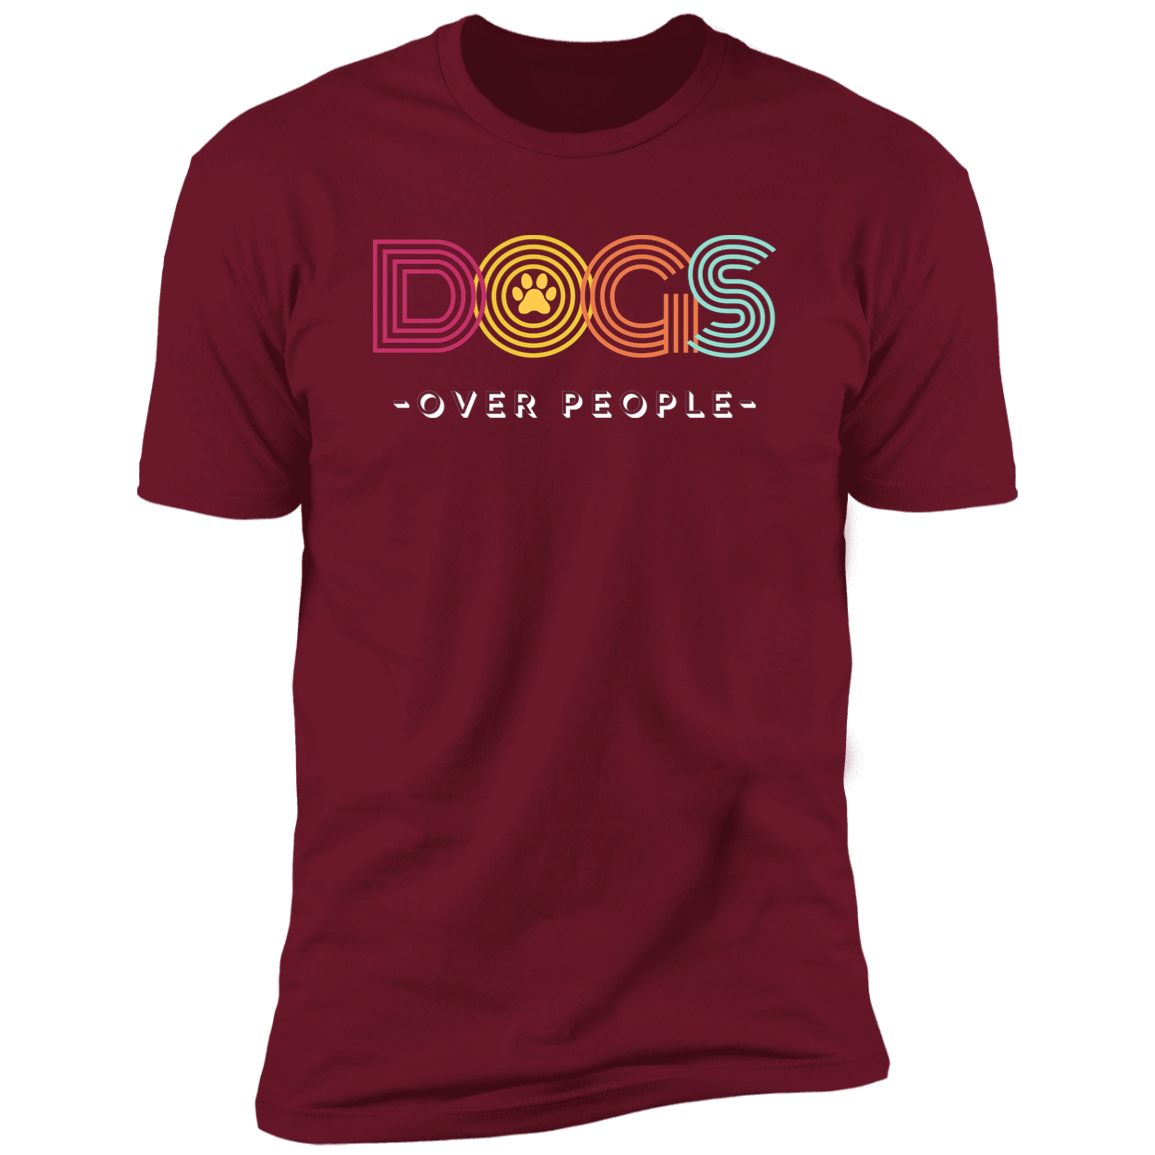 Dogs Over People t-shirt, funny dog shirt for humans, in cardinal red